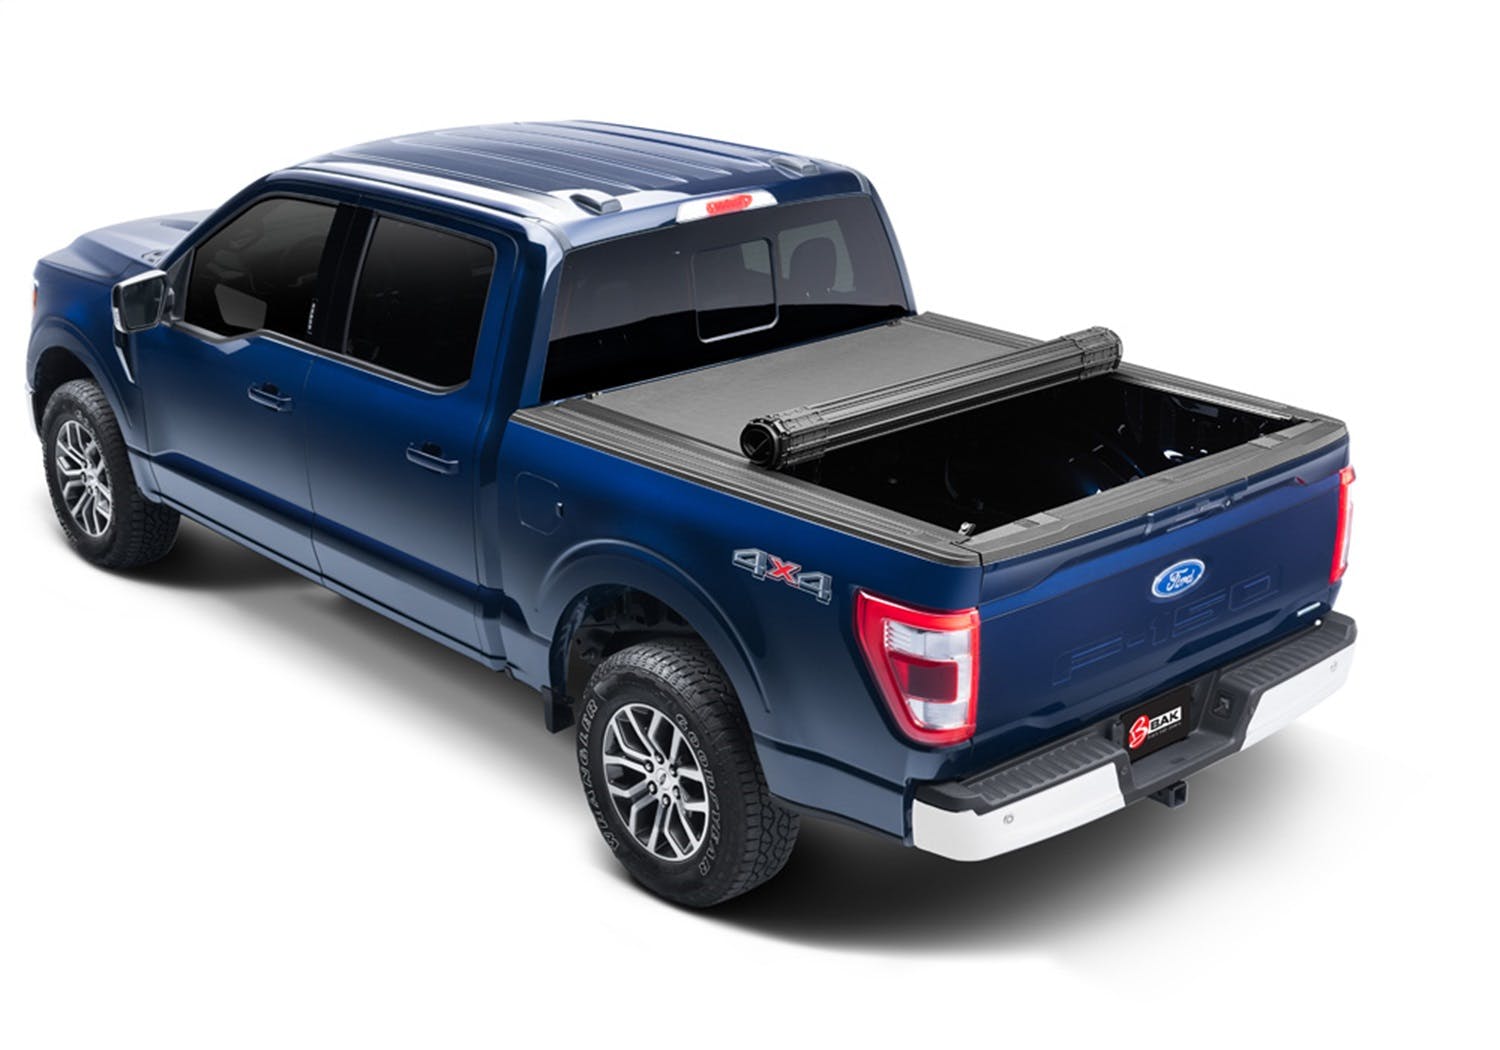 BAK Industries 80339 Revolver X4s Hard Rolling Truck Bed Cover